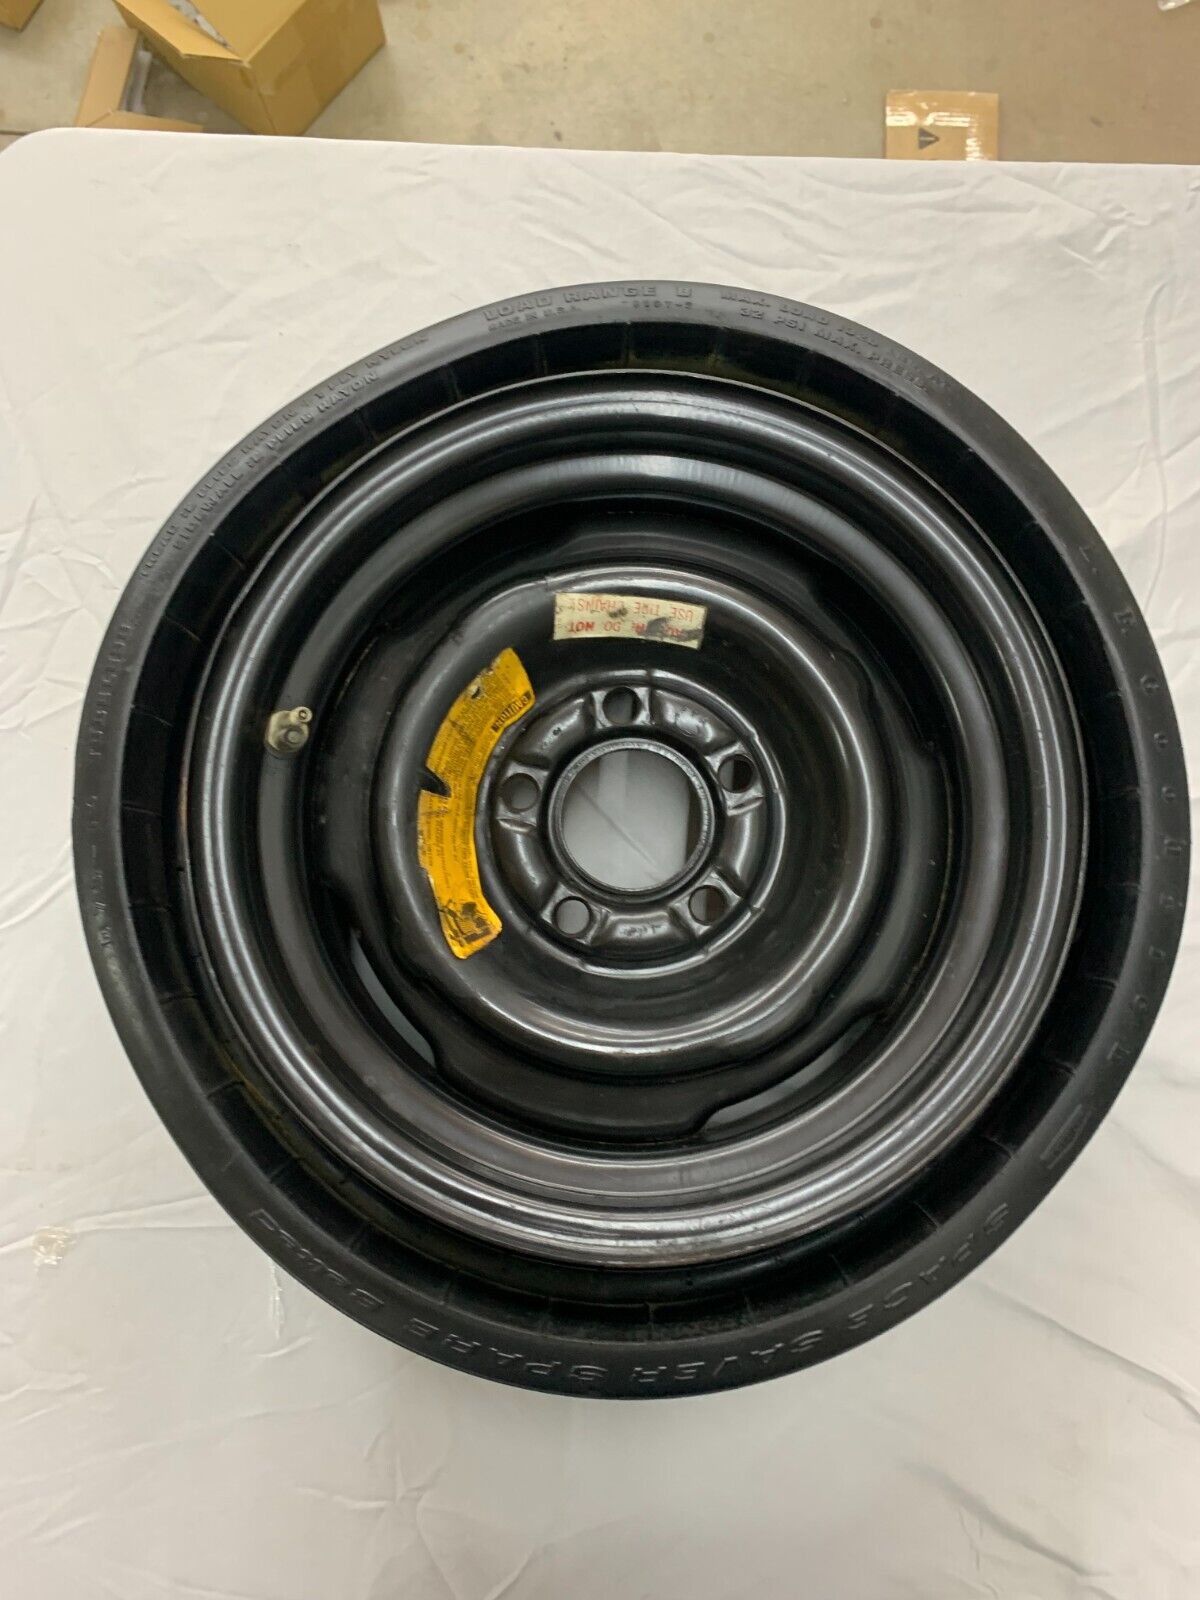 1968-1972 Mustang / Boss / Cougar Space Saver spare tire.